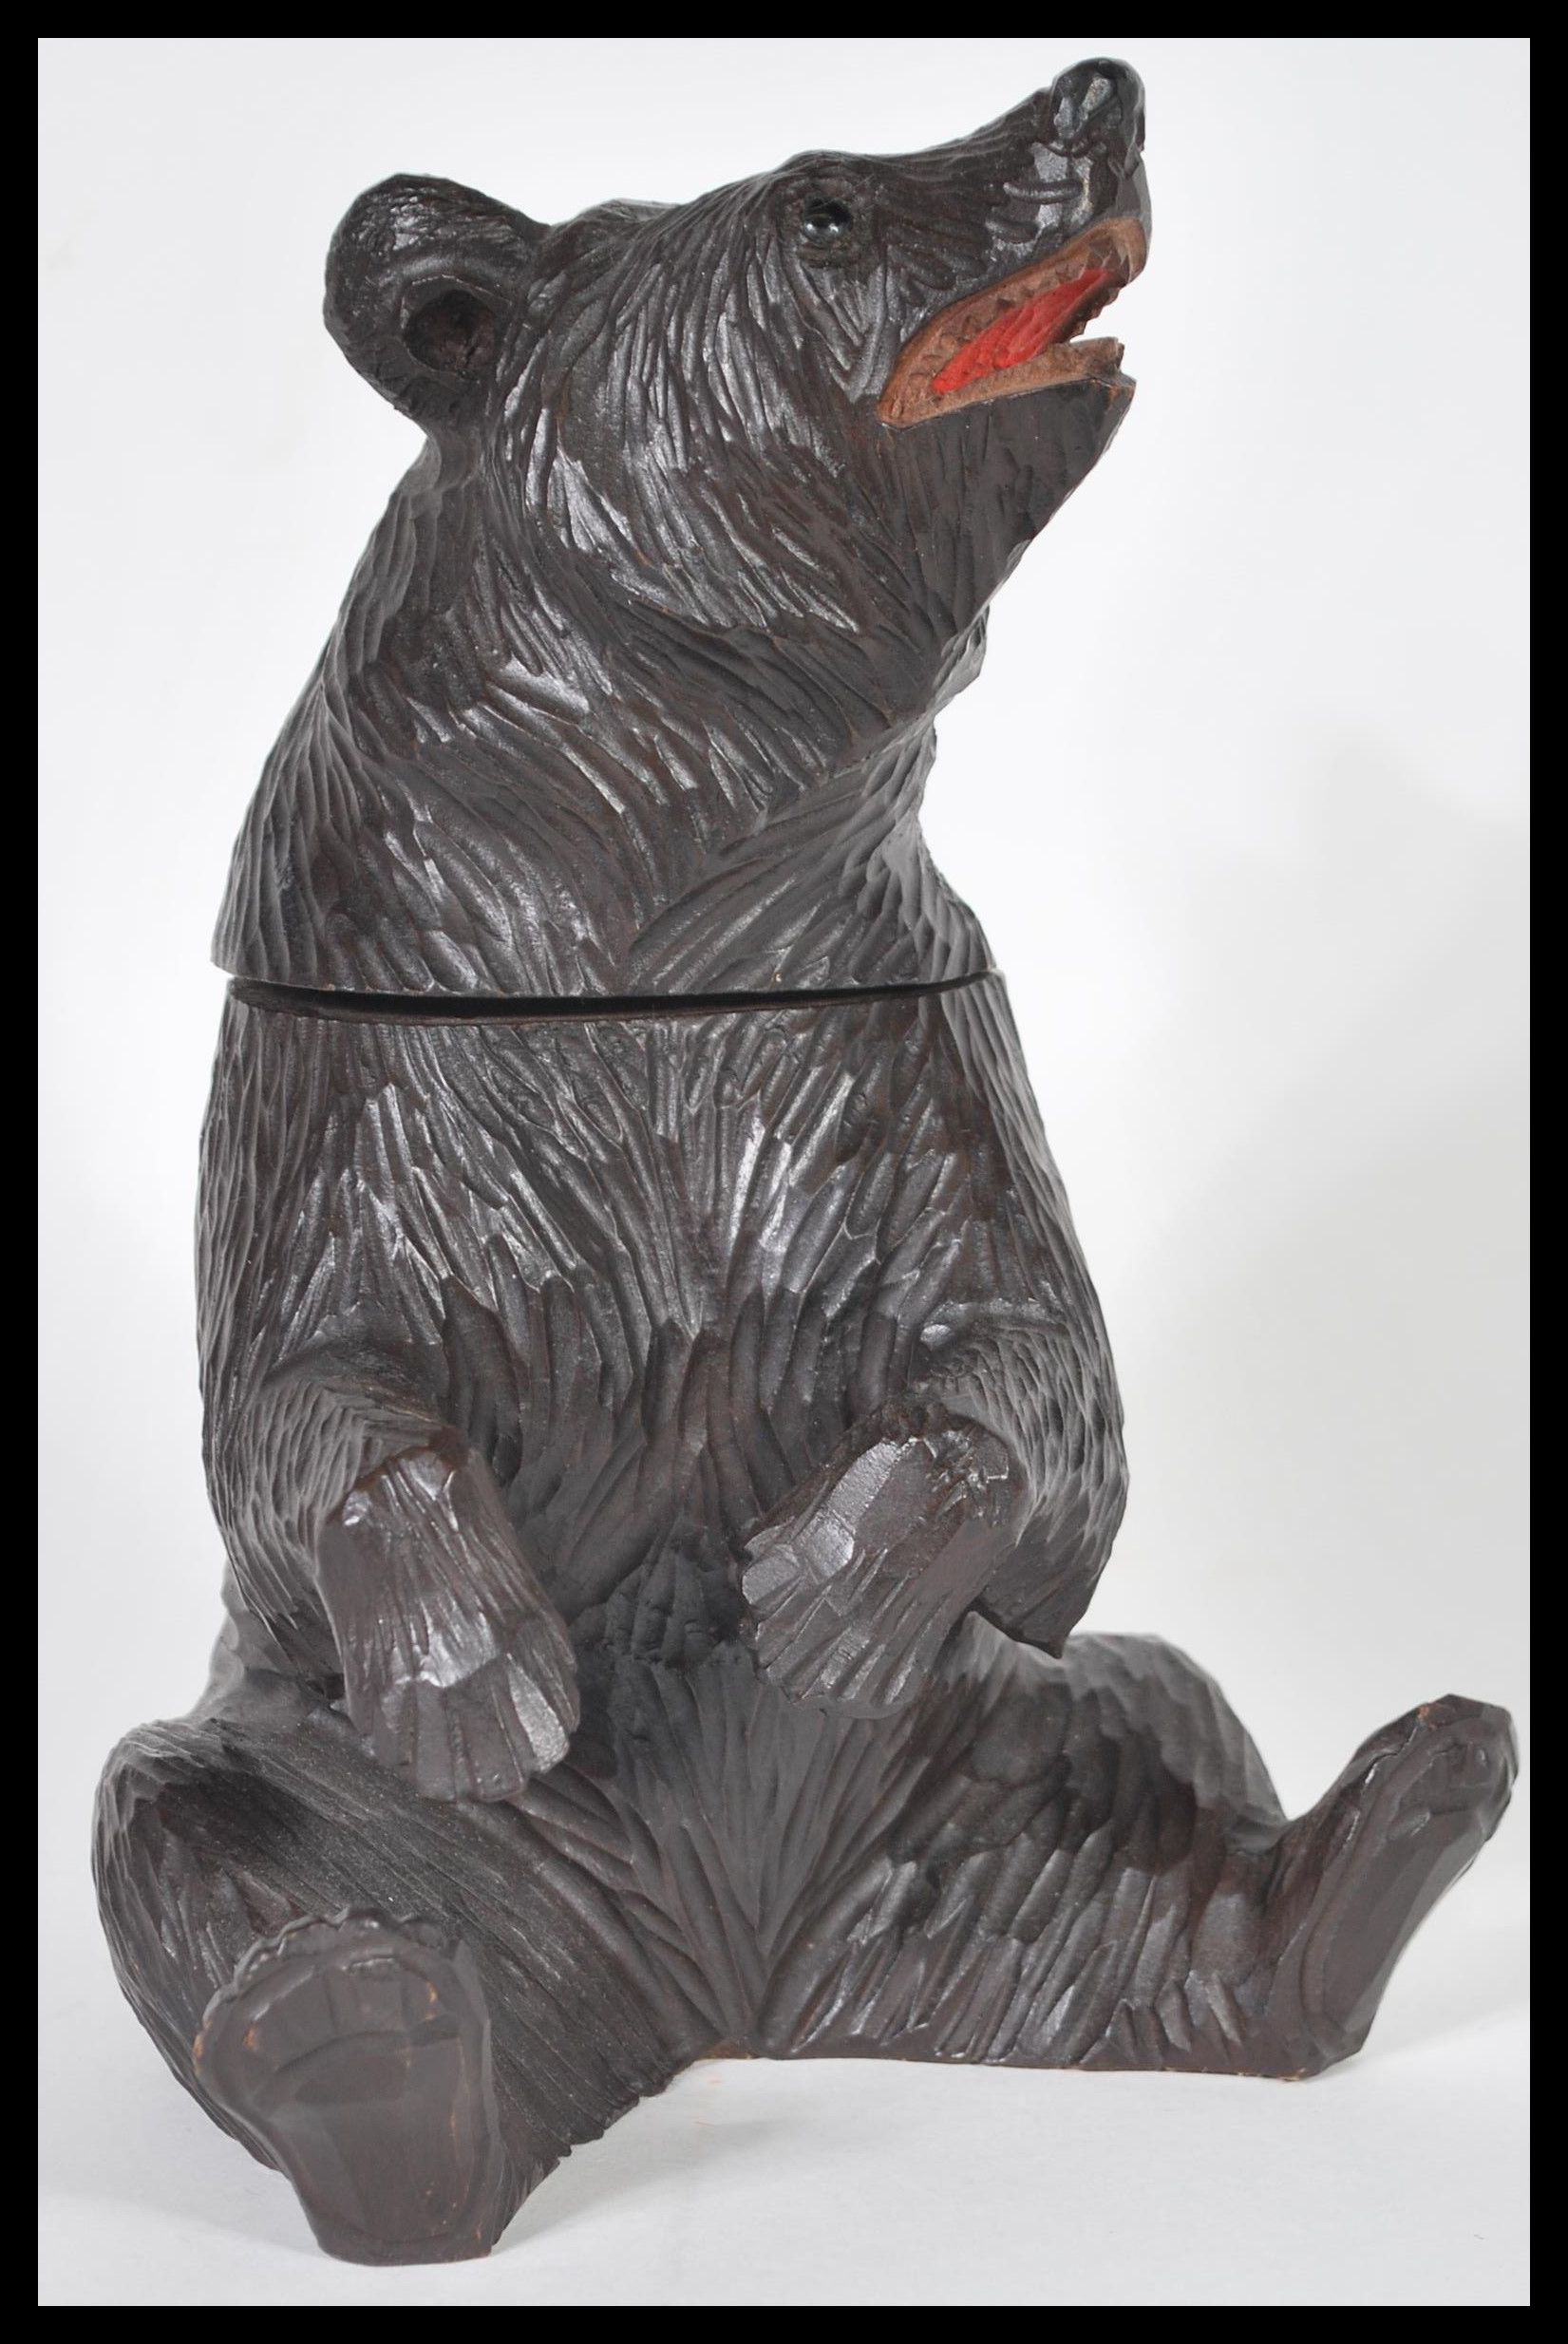 A German Black Forest hand carved wooden tobacco pot or tea caddy in the form of a bear having